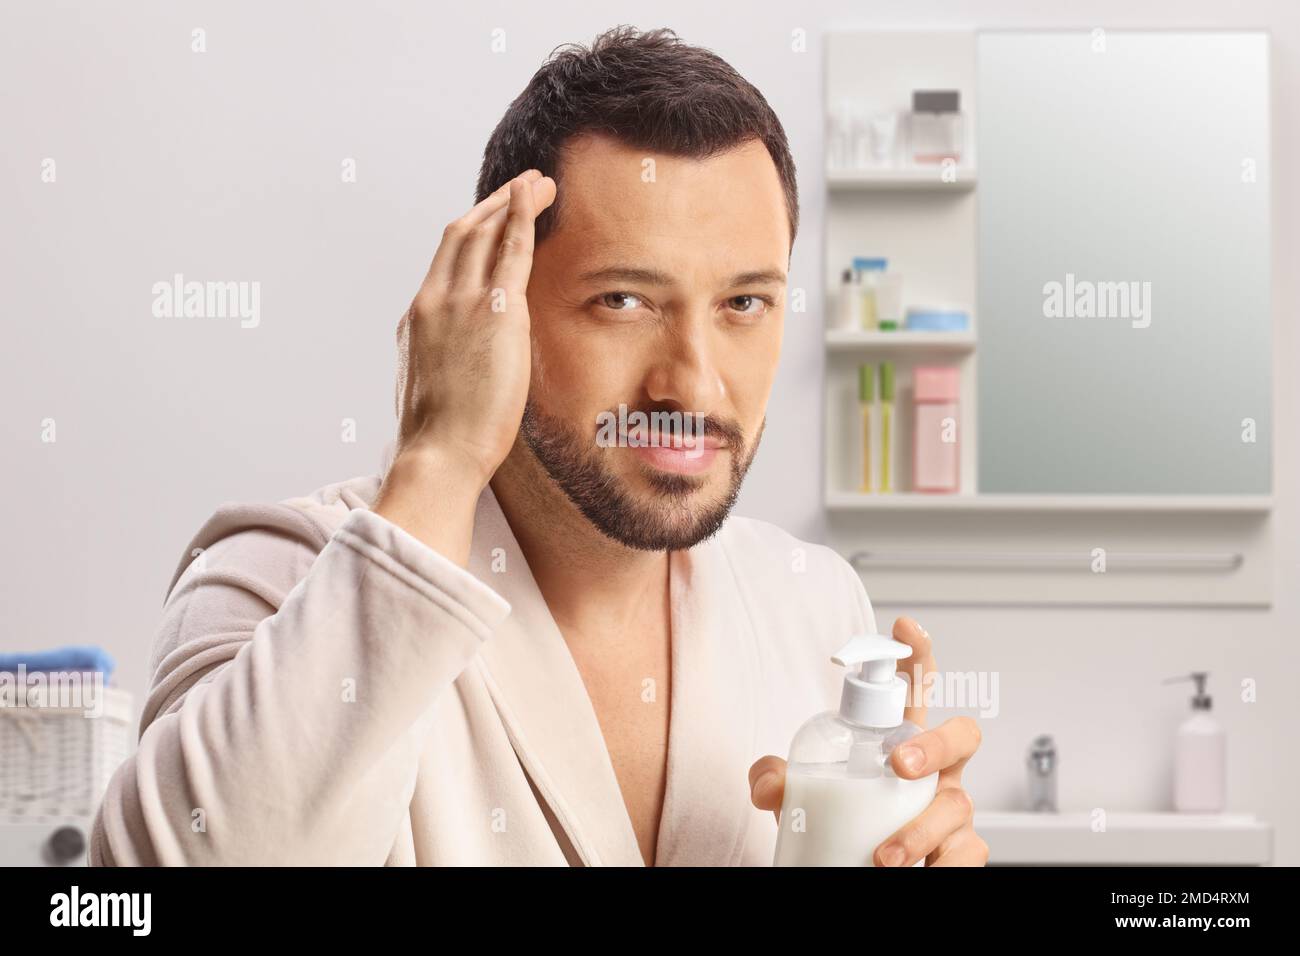 Young man in a bathrobe putting on a hair conditioner inside a bathroom Stock Photo